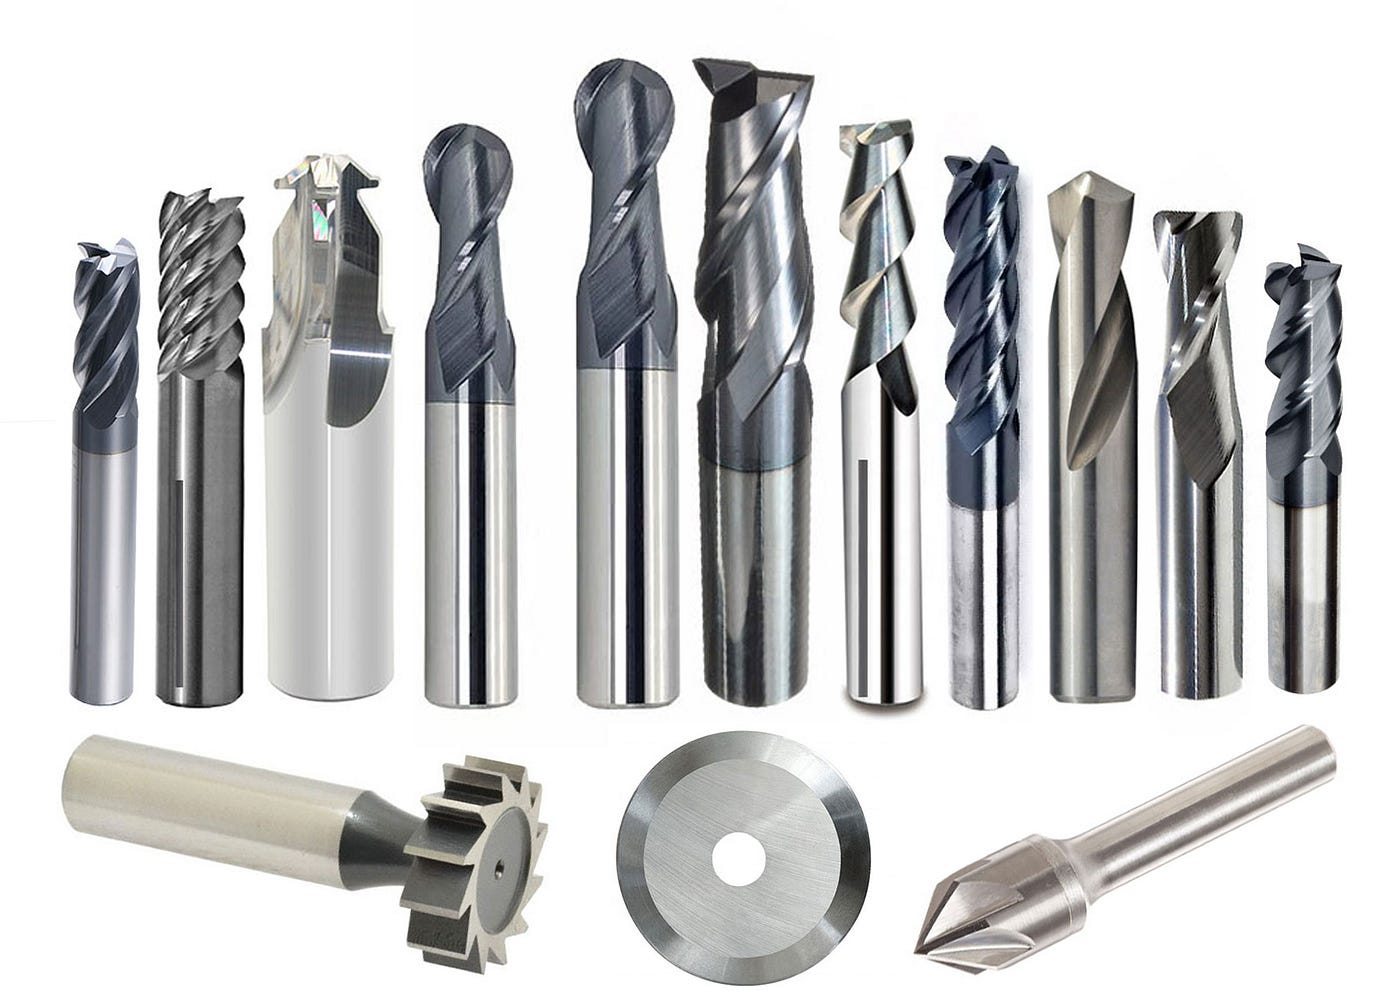 Why Choose Industrial Solid Carbide Cutting Tools